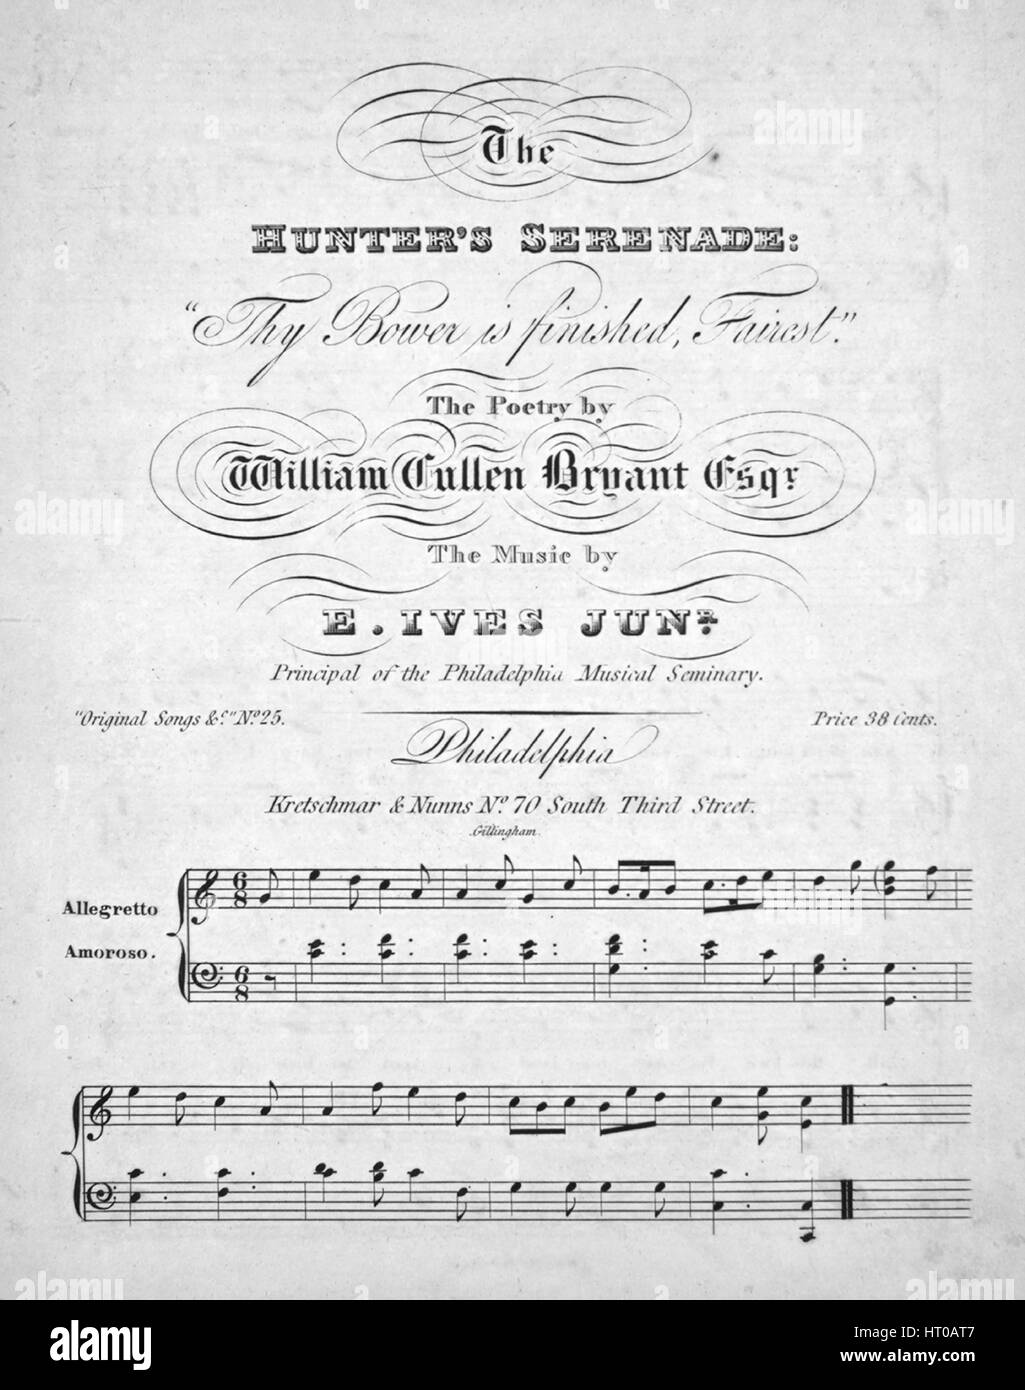 Sheet music cover image of the song 'The Hunter's Serenade  'Thy Bower is Finished, Fairest'', with original authorship notes reading 'The Poetry by William Cullen Bryant, Esqr The Music by E Ives Junr, Principal of the Philadelphia Musical Seminary', United States, 1900. The publisher is listed as 'Kretschmar and Nunns, No.70 South Third Street', the form of composition is 'strophic', the instrumentation is 'piano and voice', the first line reads 'Thy bow'r is finish'd, fairest, Fit bow'r for hunter's bride', and the illustration artist is listed as 'Gillingham'. Stock Photo